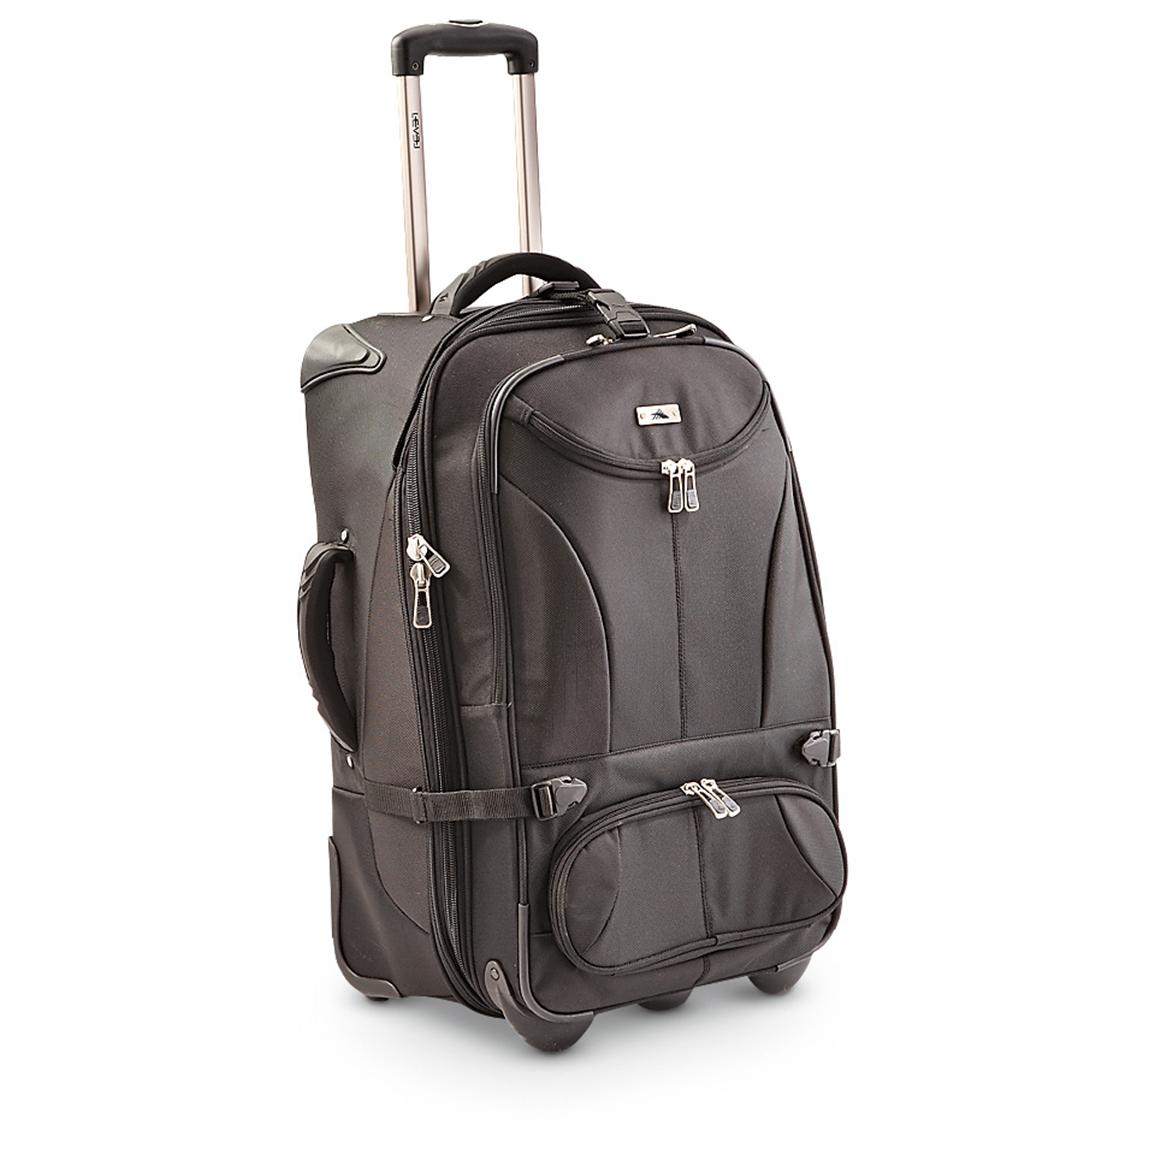 Best Wheeled Carry On Duffel Bags | IQS Executive